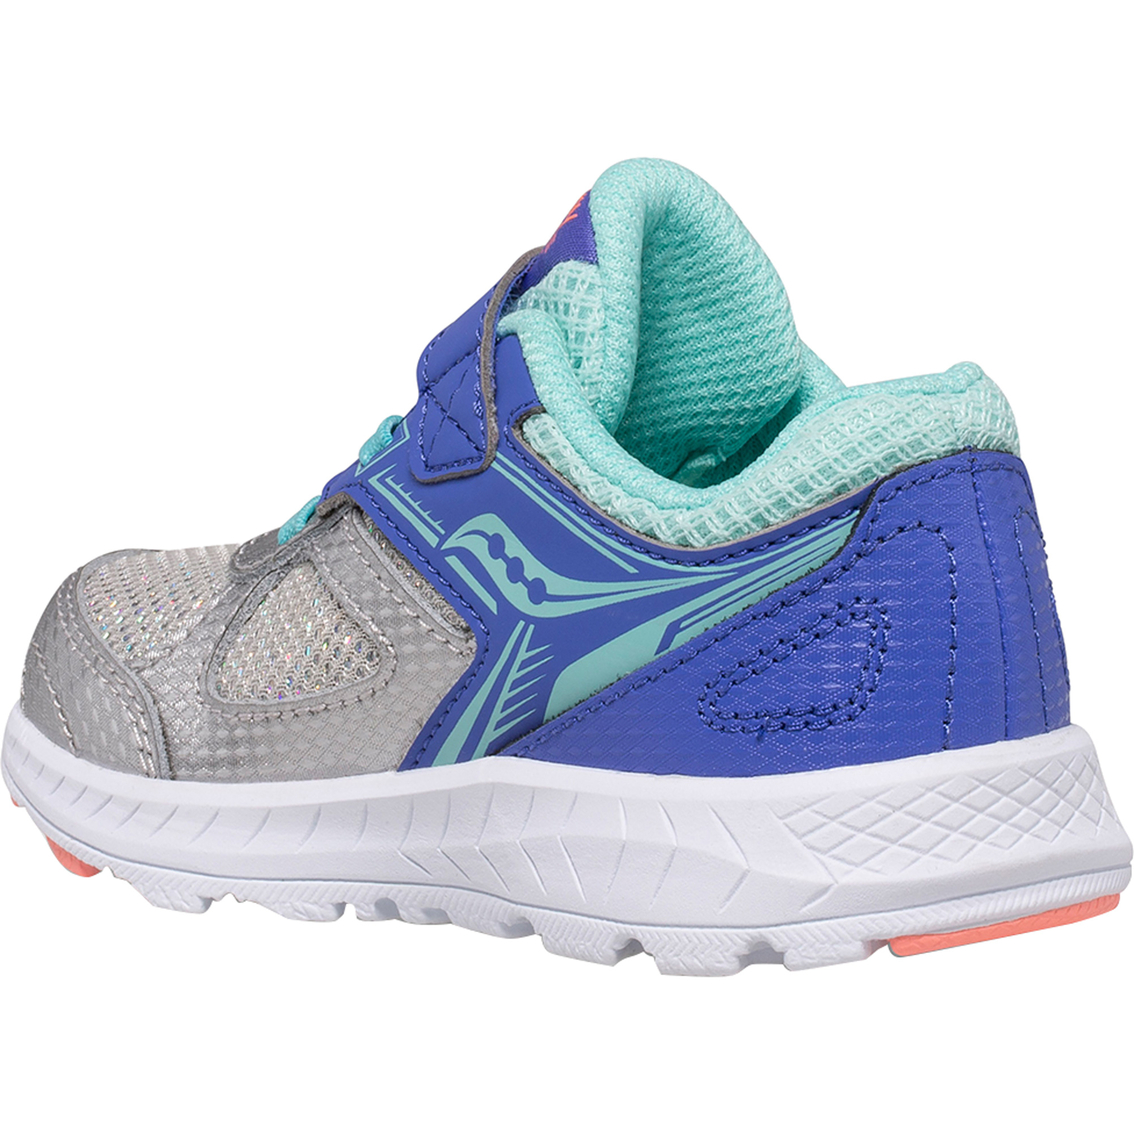 Saucony Girls Cohesion 14 A/C Jr. Running Shoes - Image 3 of 4